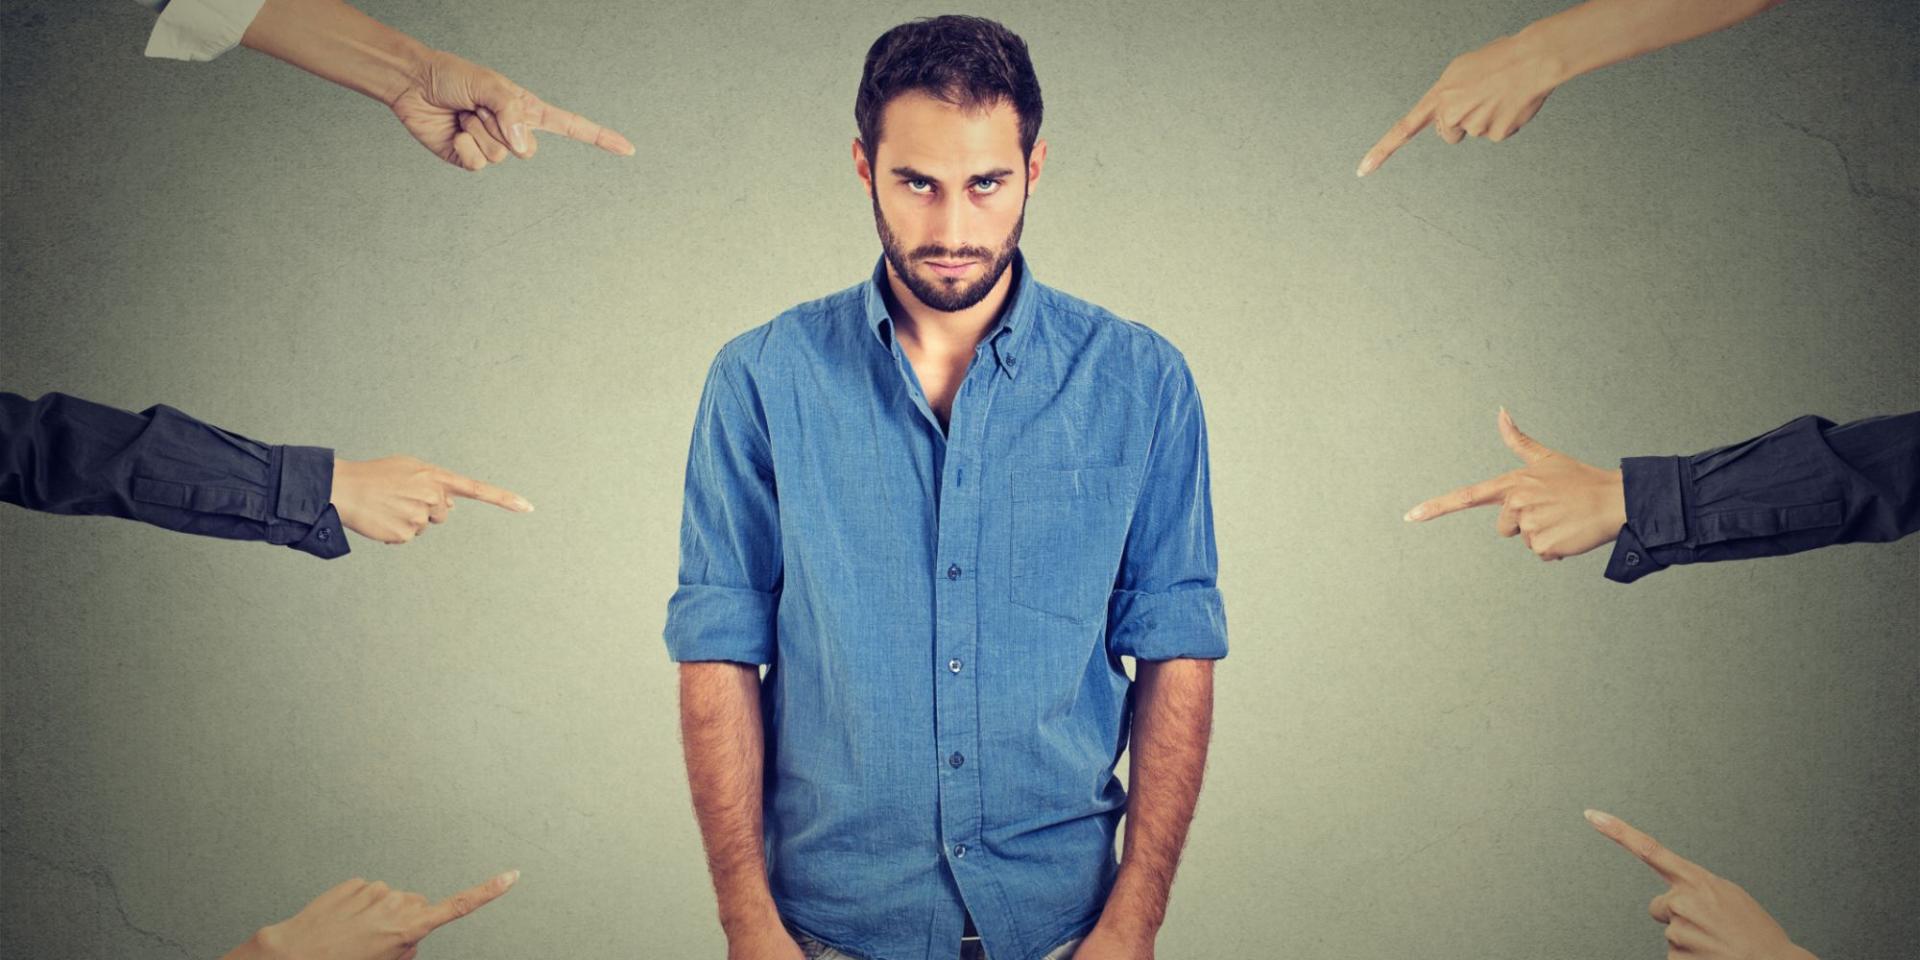 man in blue shirt trying to defeat fear of failure